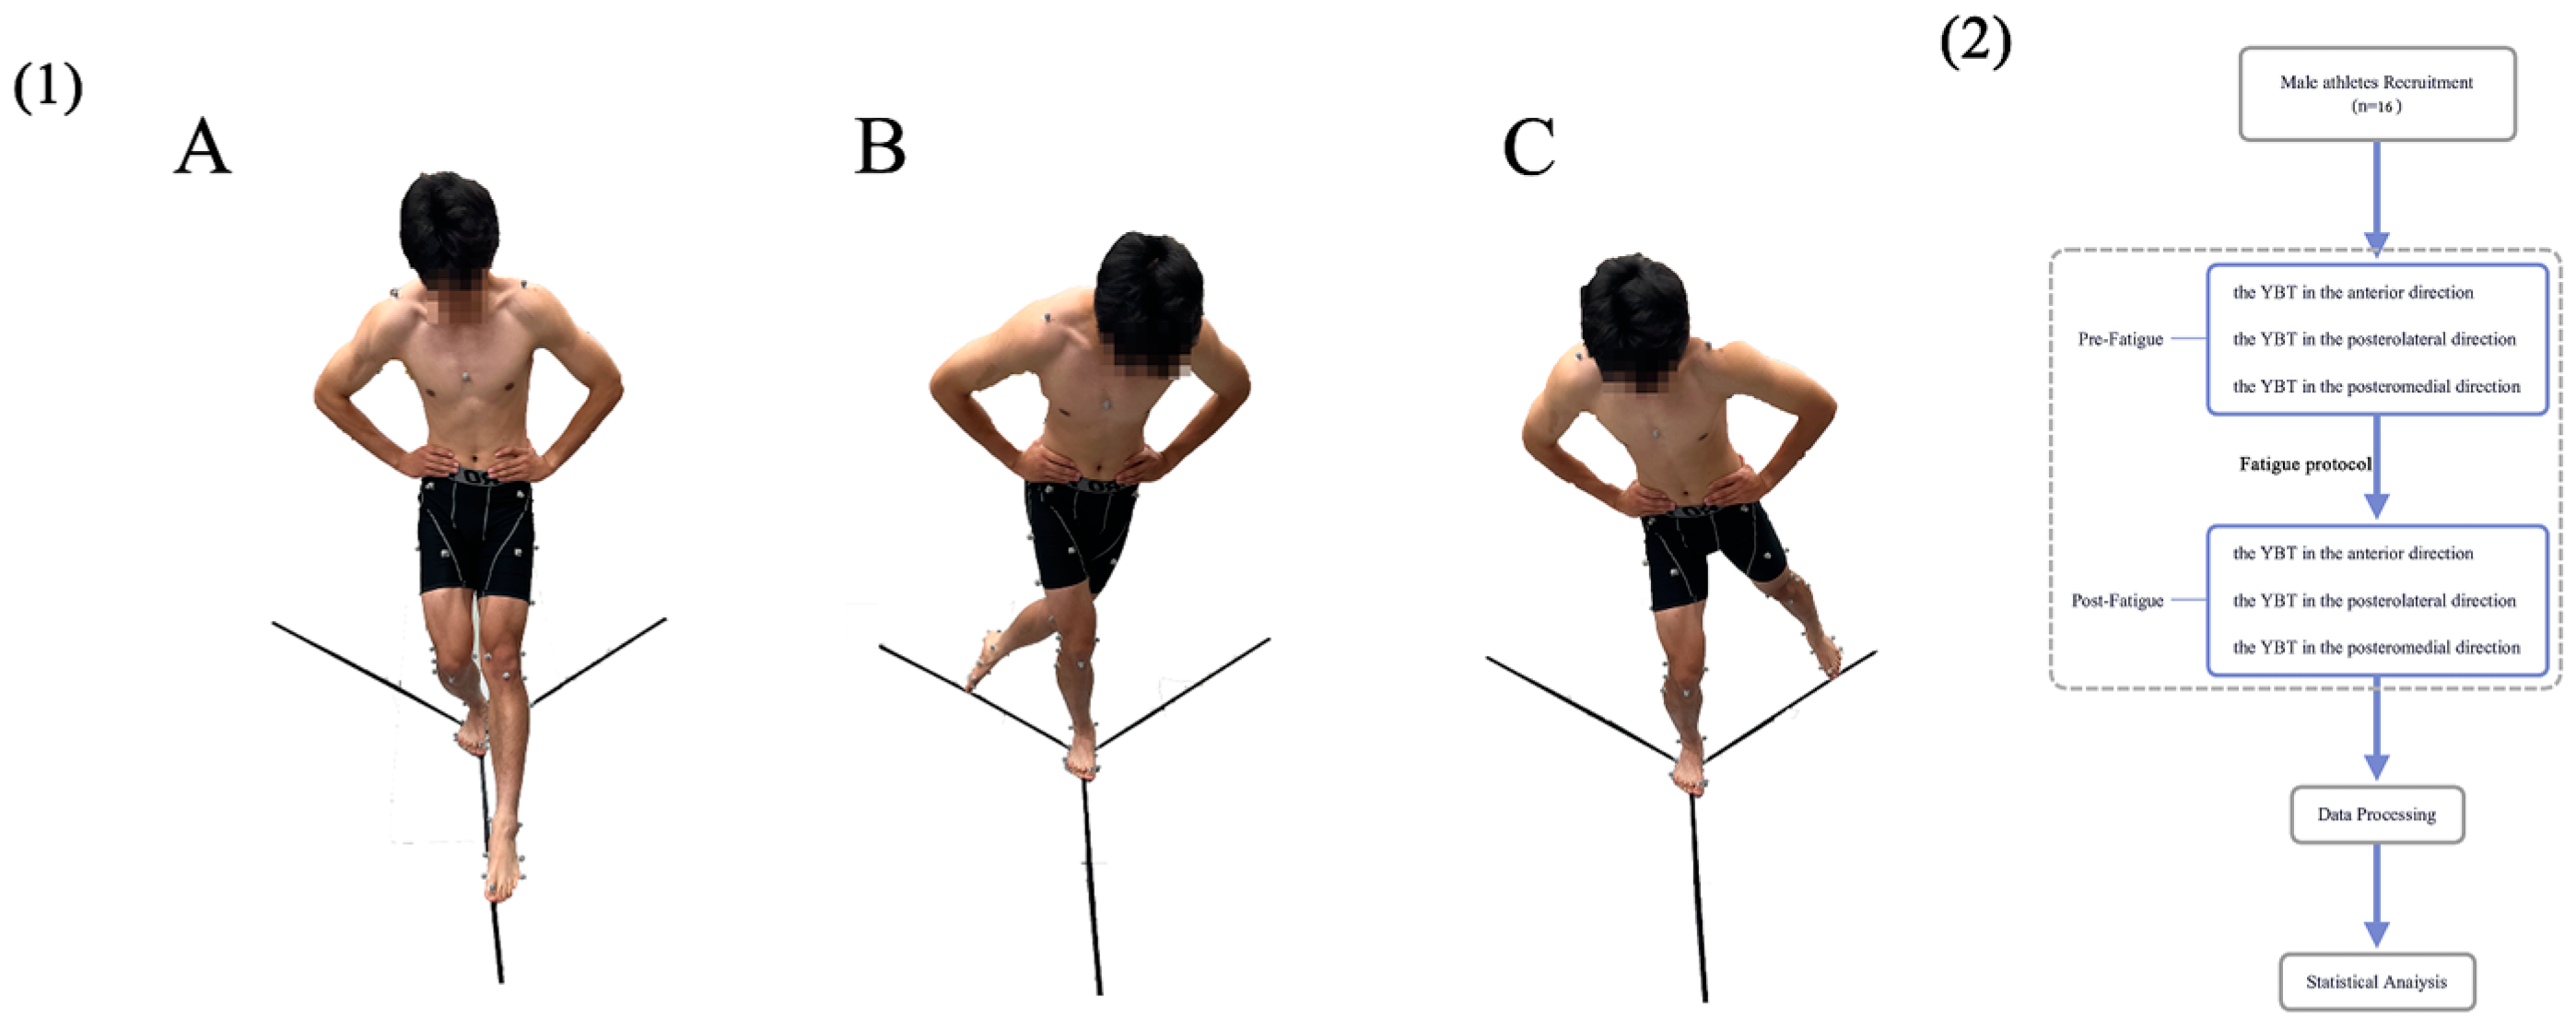 Healthcare Free Full-Text The Effects of Fatigue on the Lower Limb Biomechanics of Amateur Athletes during a Y-Balance Test picture image